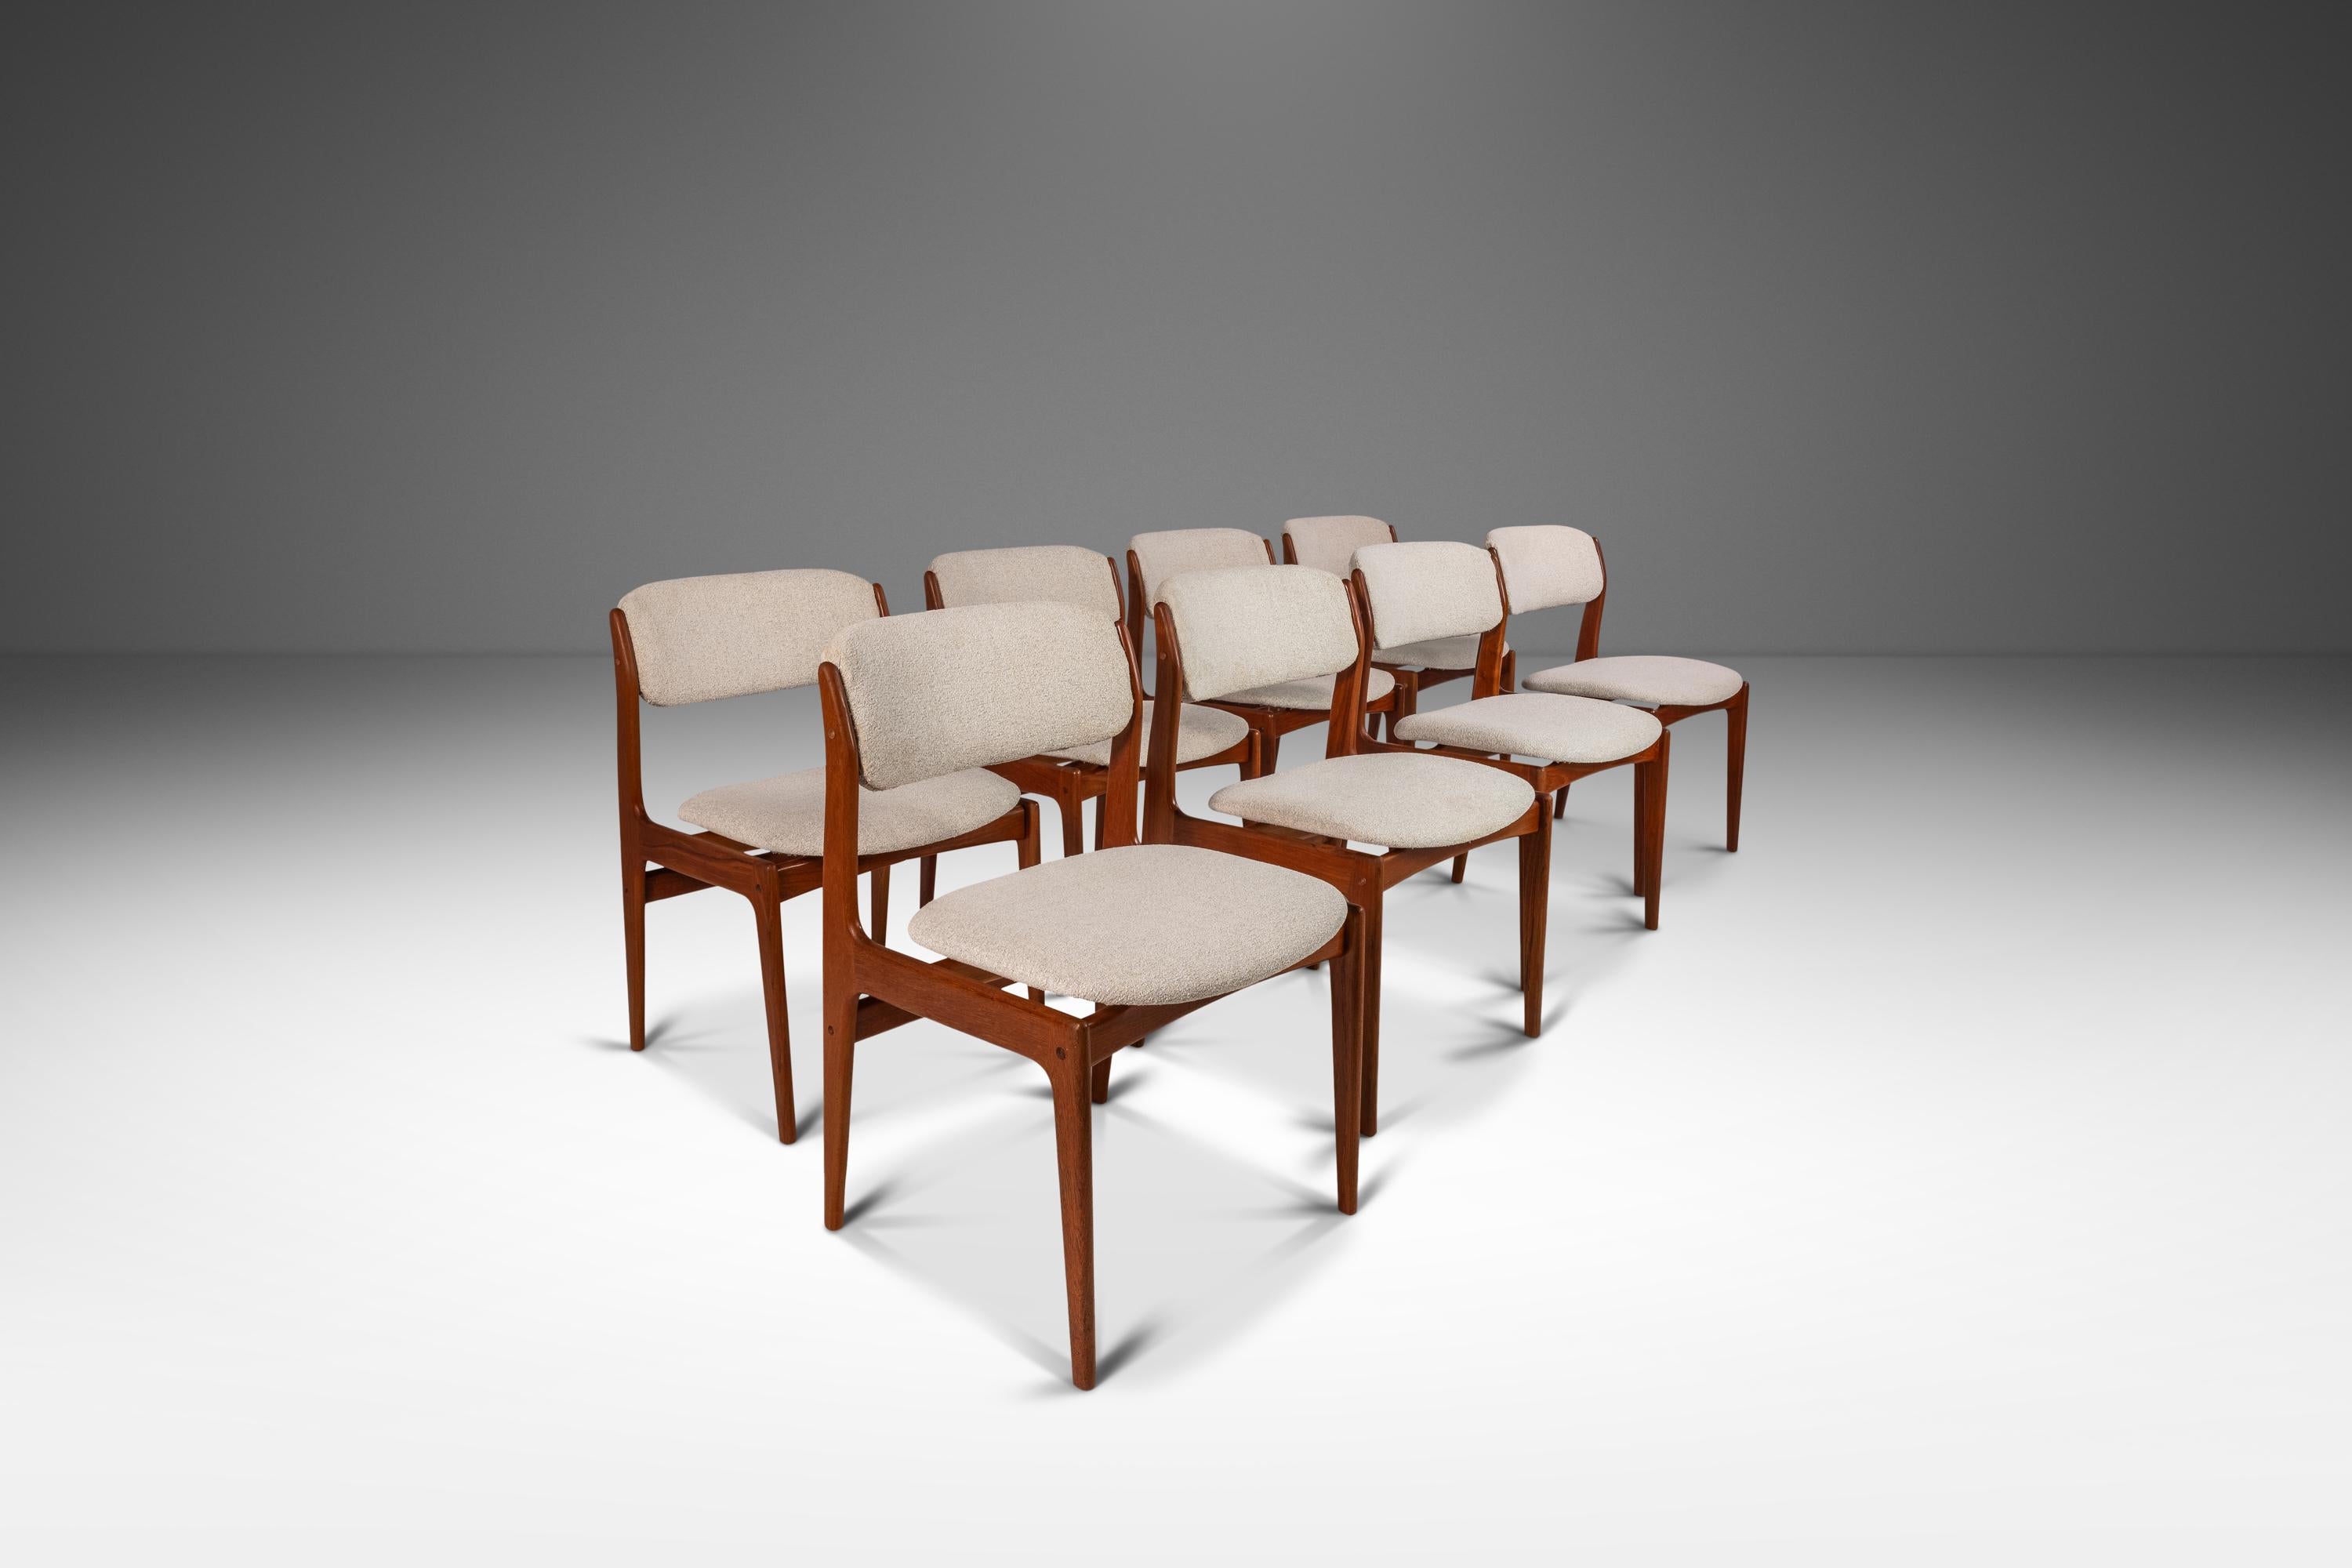 Set of Eight (8) Danish Modern Dining Chairs in Teak by Benny Linden, c. 1970's 2